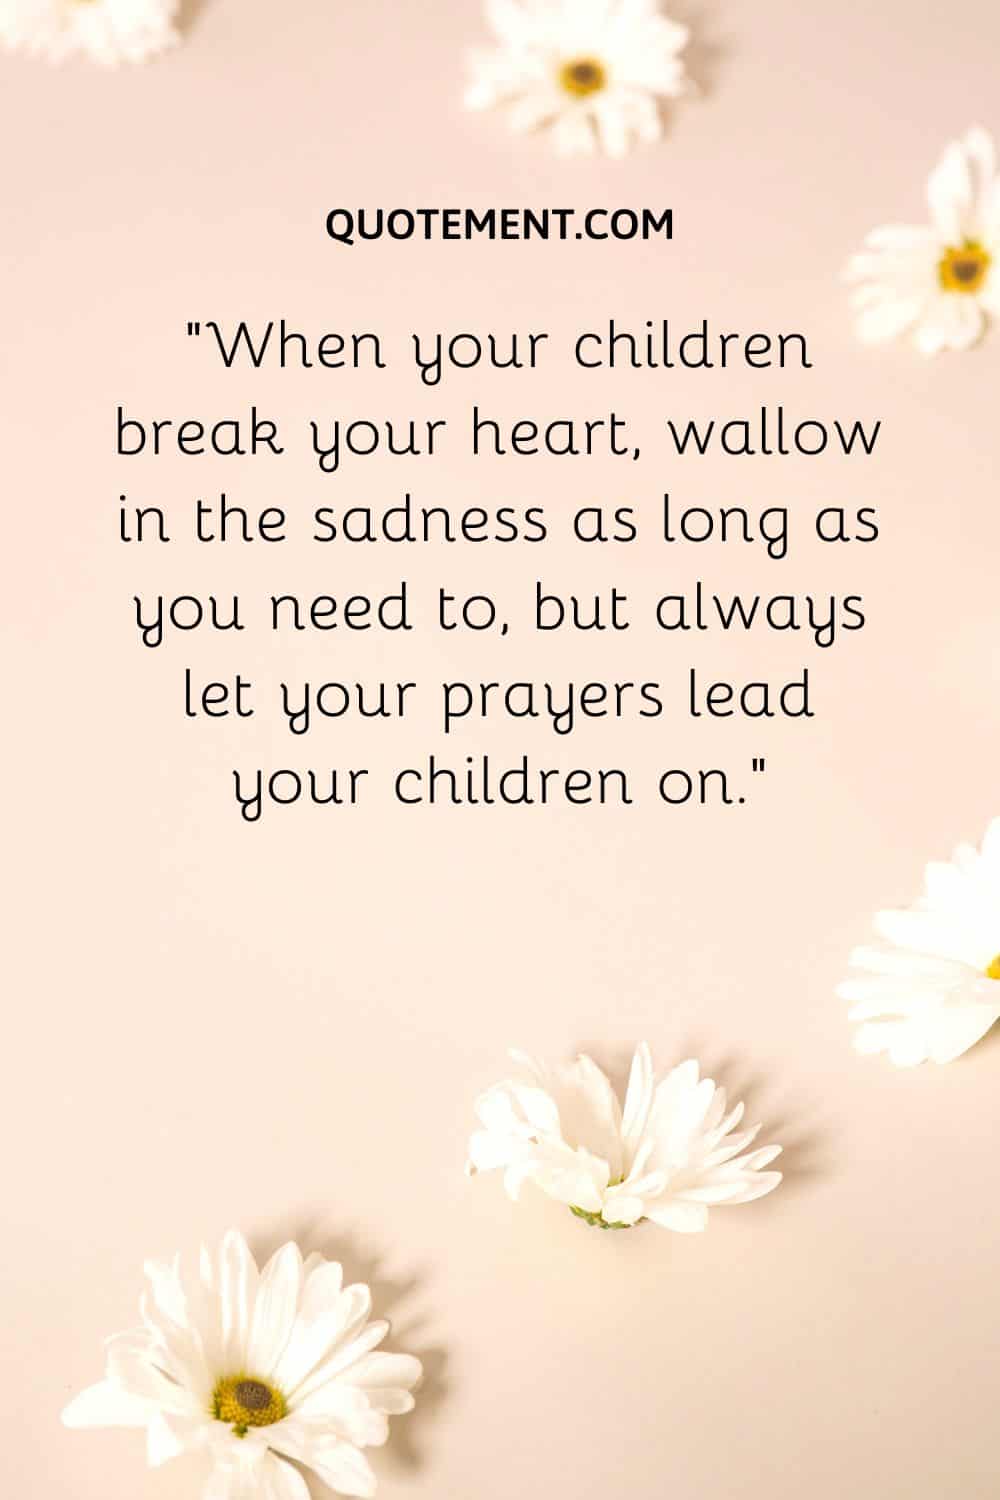 When your children break your heart, wallow in the sadness as long as you need to, but always let your prayers lead your children on.